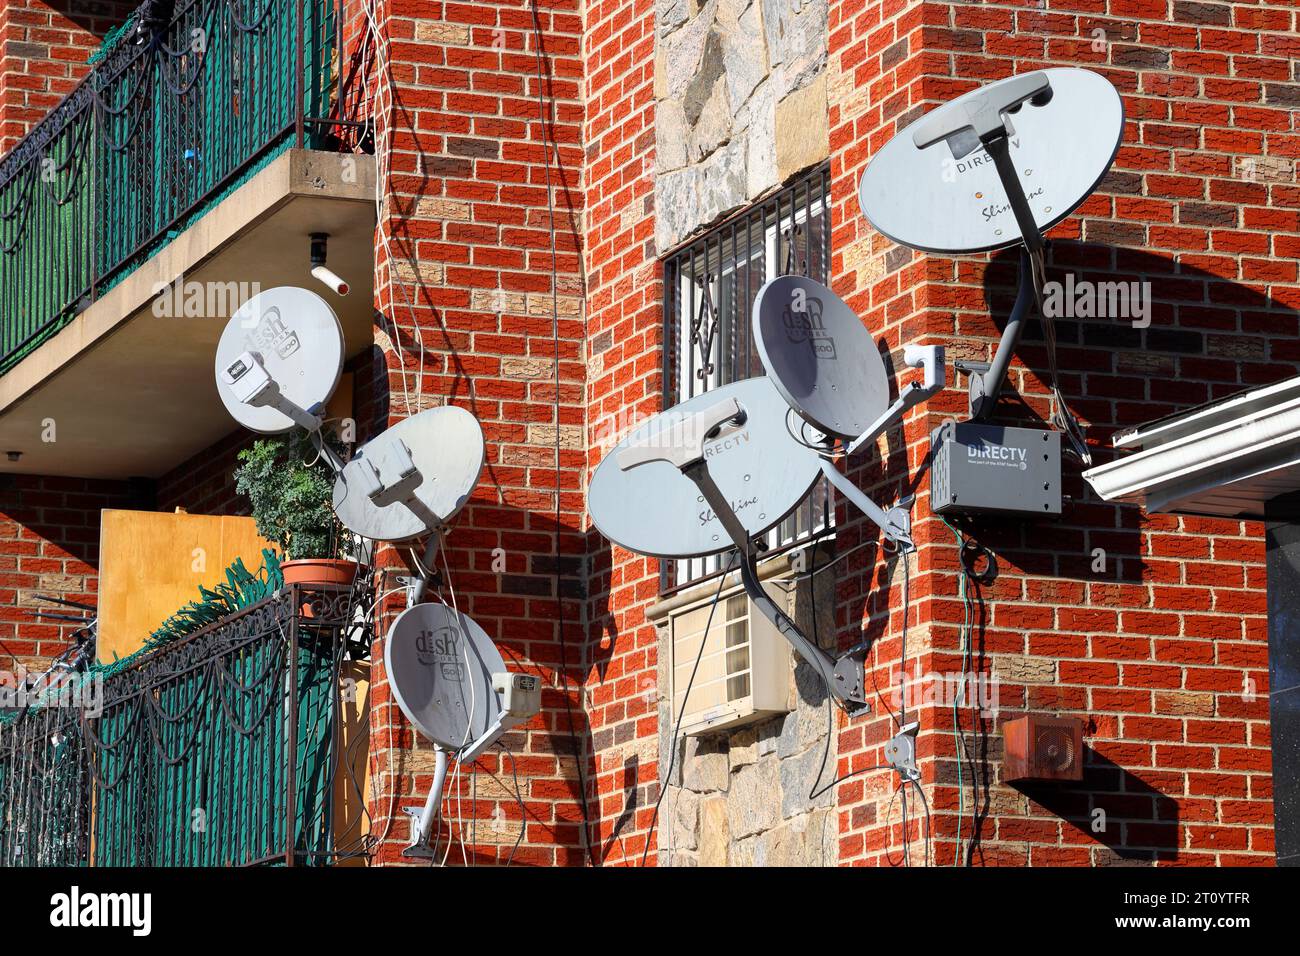 Multiple TV satellite dishes on the side of an apartment building in NYC. Dish network, DirecTV digital satellite broadcast antennas. Stock Photo